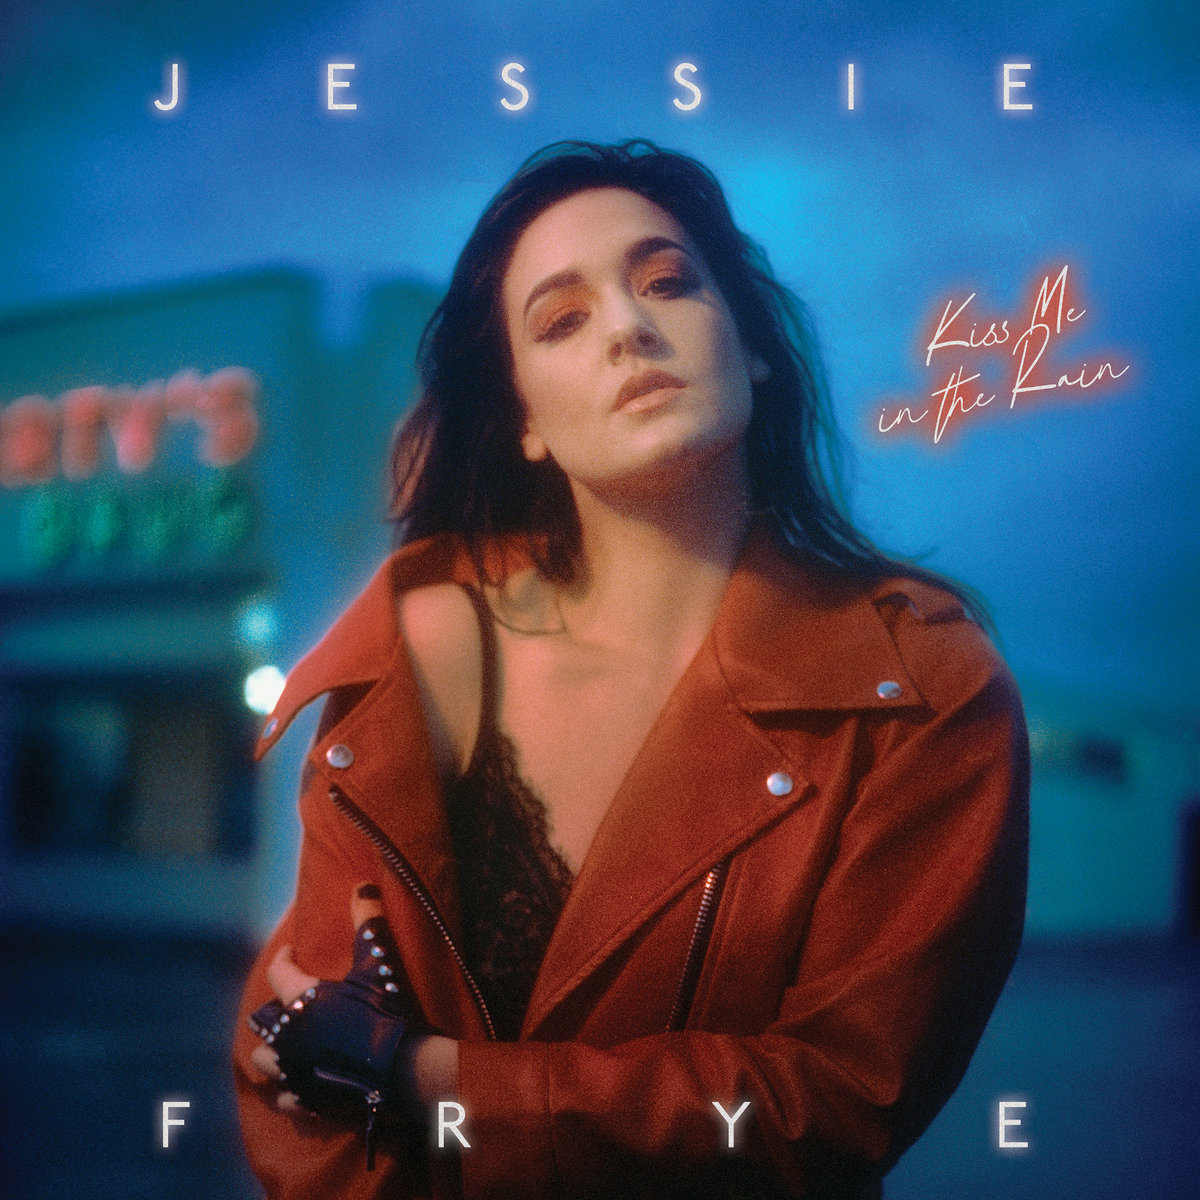 a2306608900 10 - Jessie Frye - Kiss Me In The Rain Out This Friday!